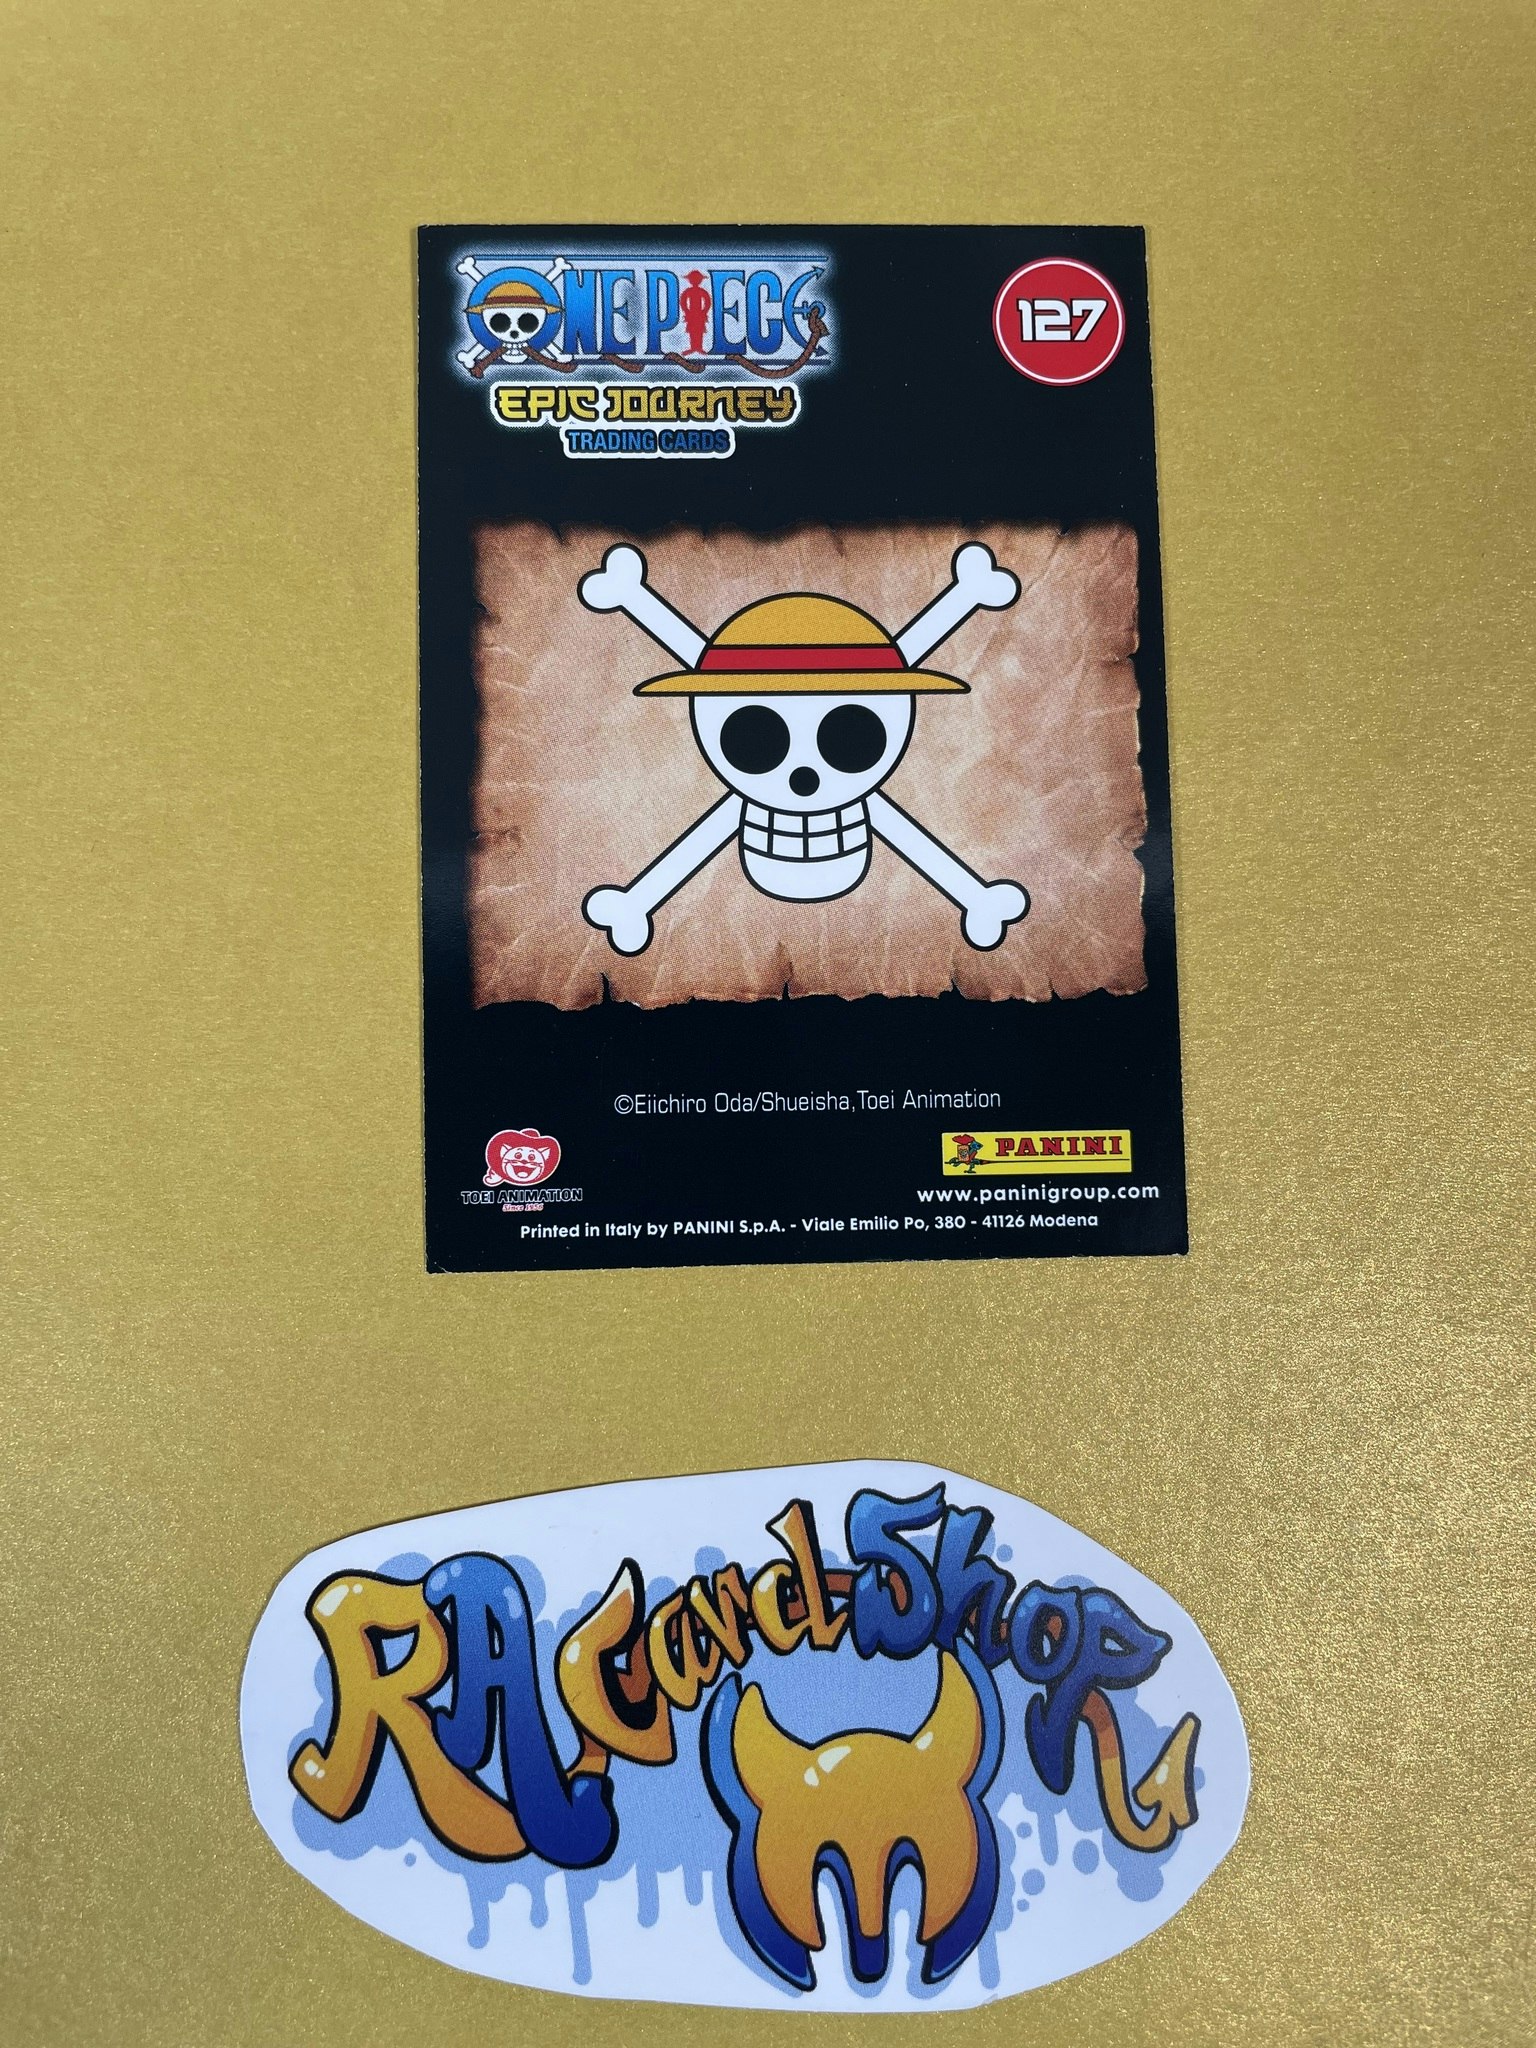 Wanted Monkey D Luffy Epic Journey 127 Trading Cards Panini One Piece